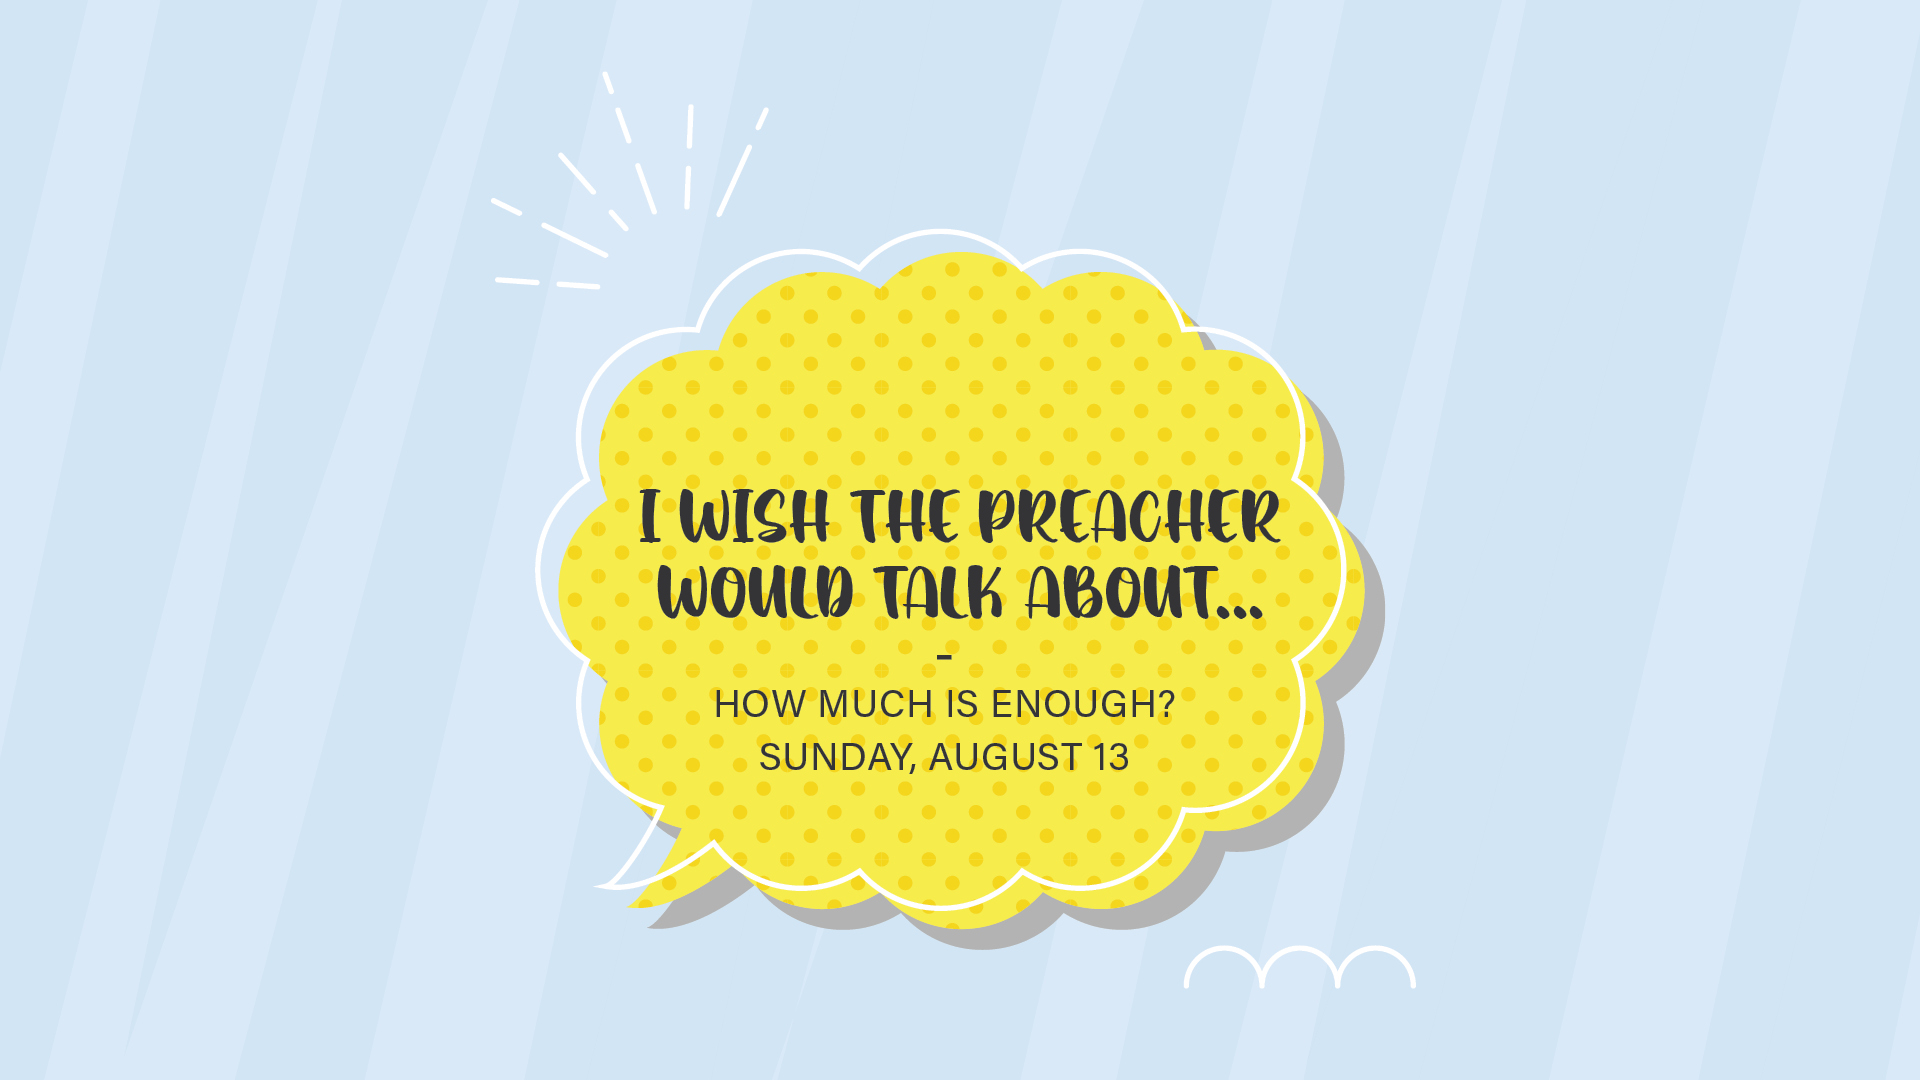 I Wish the Preacher Would Talk About: How Much is Enough?